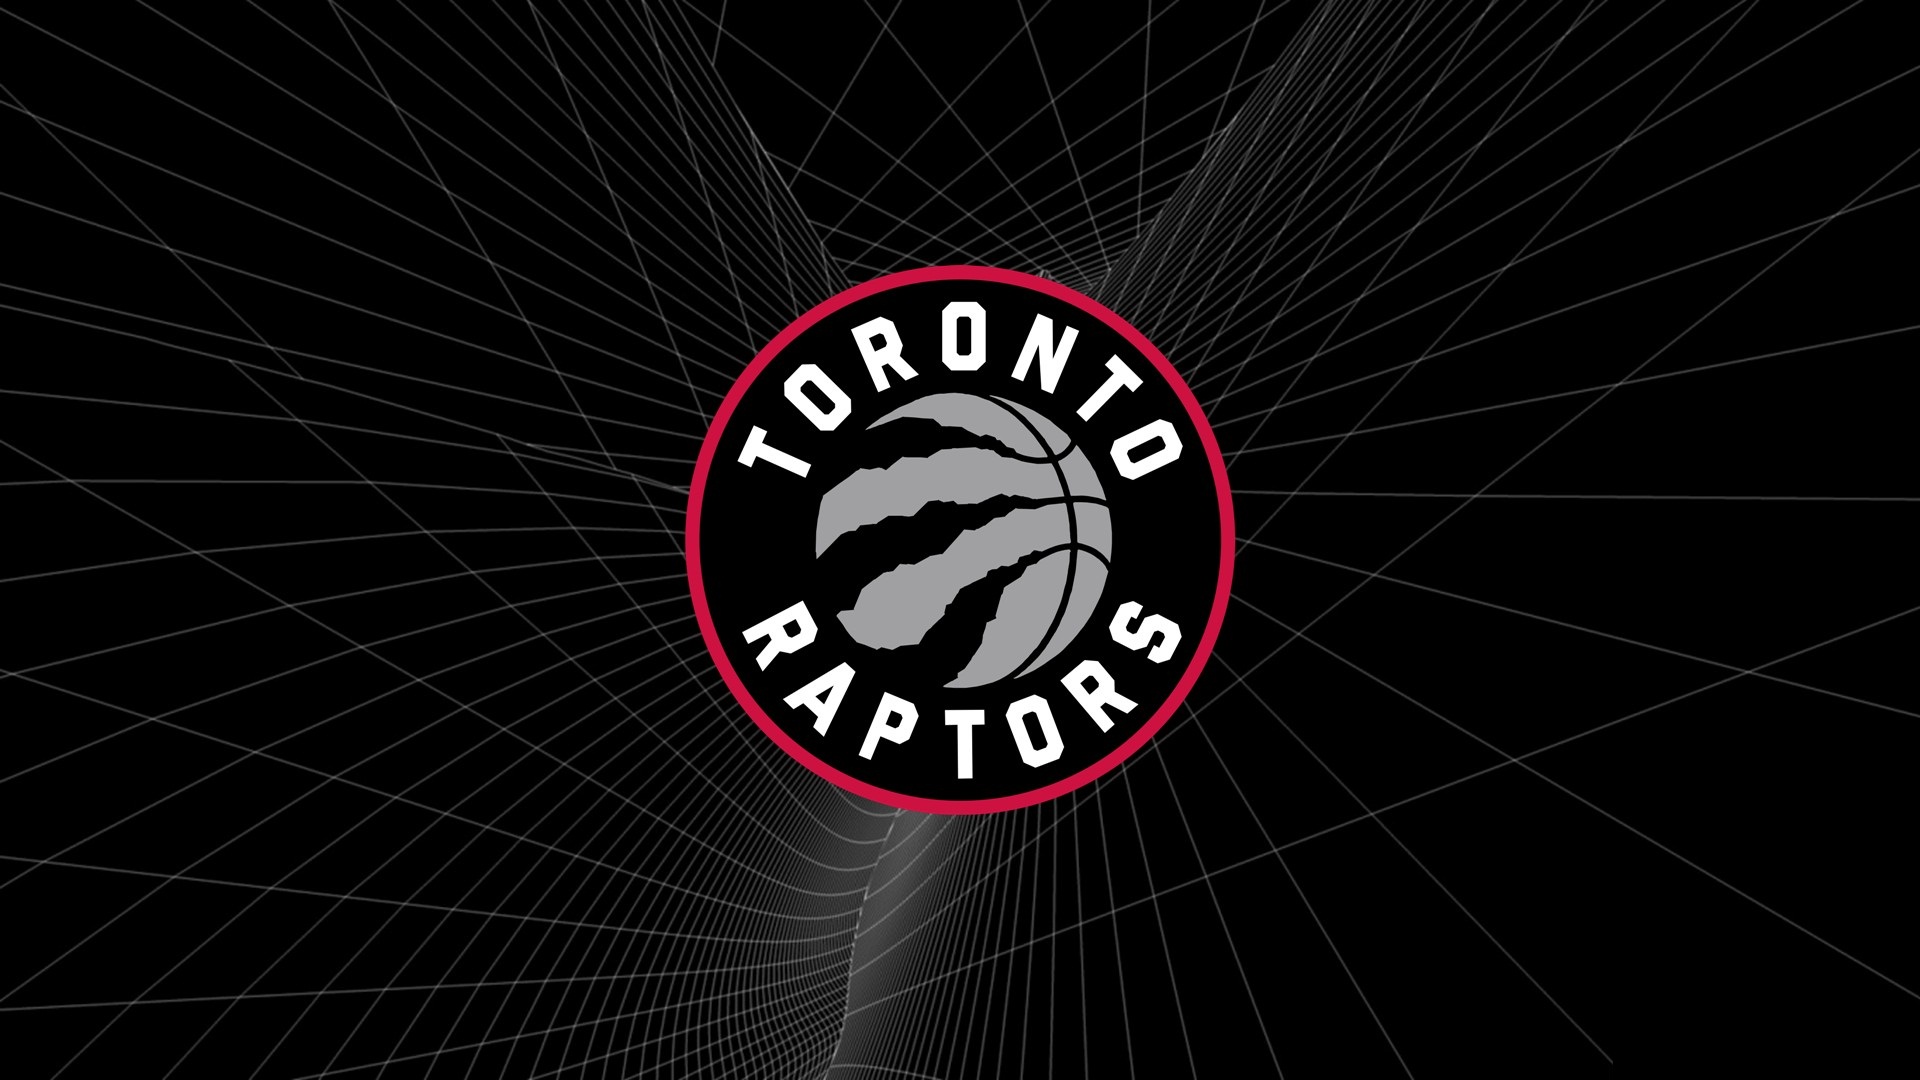 NBA Raptors Backgrounds HD with image dimensions 1920x1080 pixel. You can make this wallpaper for your Desktop Computer Backgrounds, Windows or Mac Screensavers, iPhone Lock screen, Tablet or Android and another Mobile Phone device